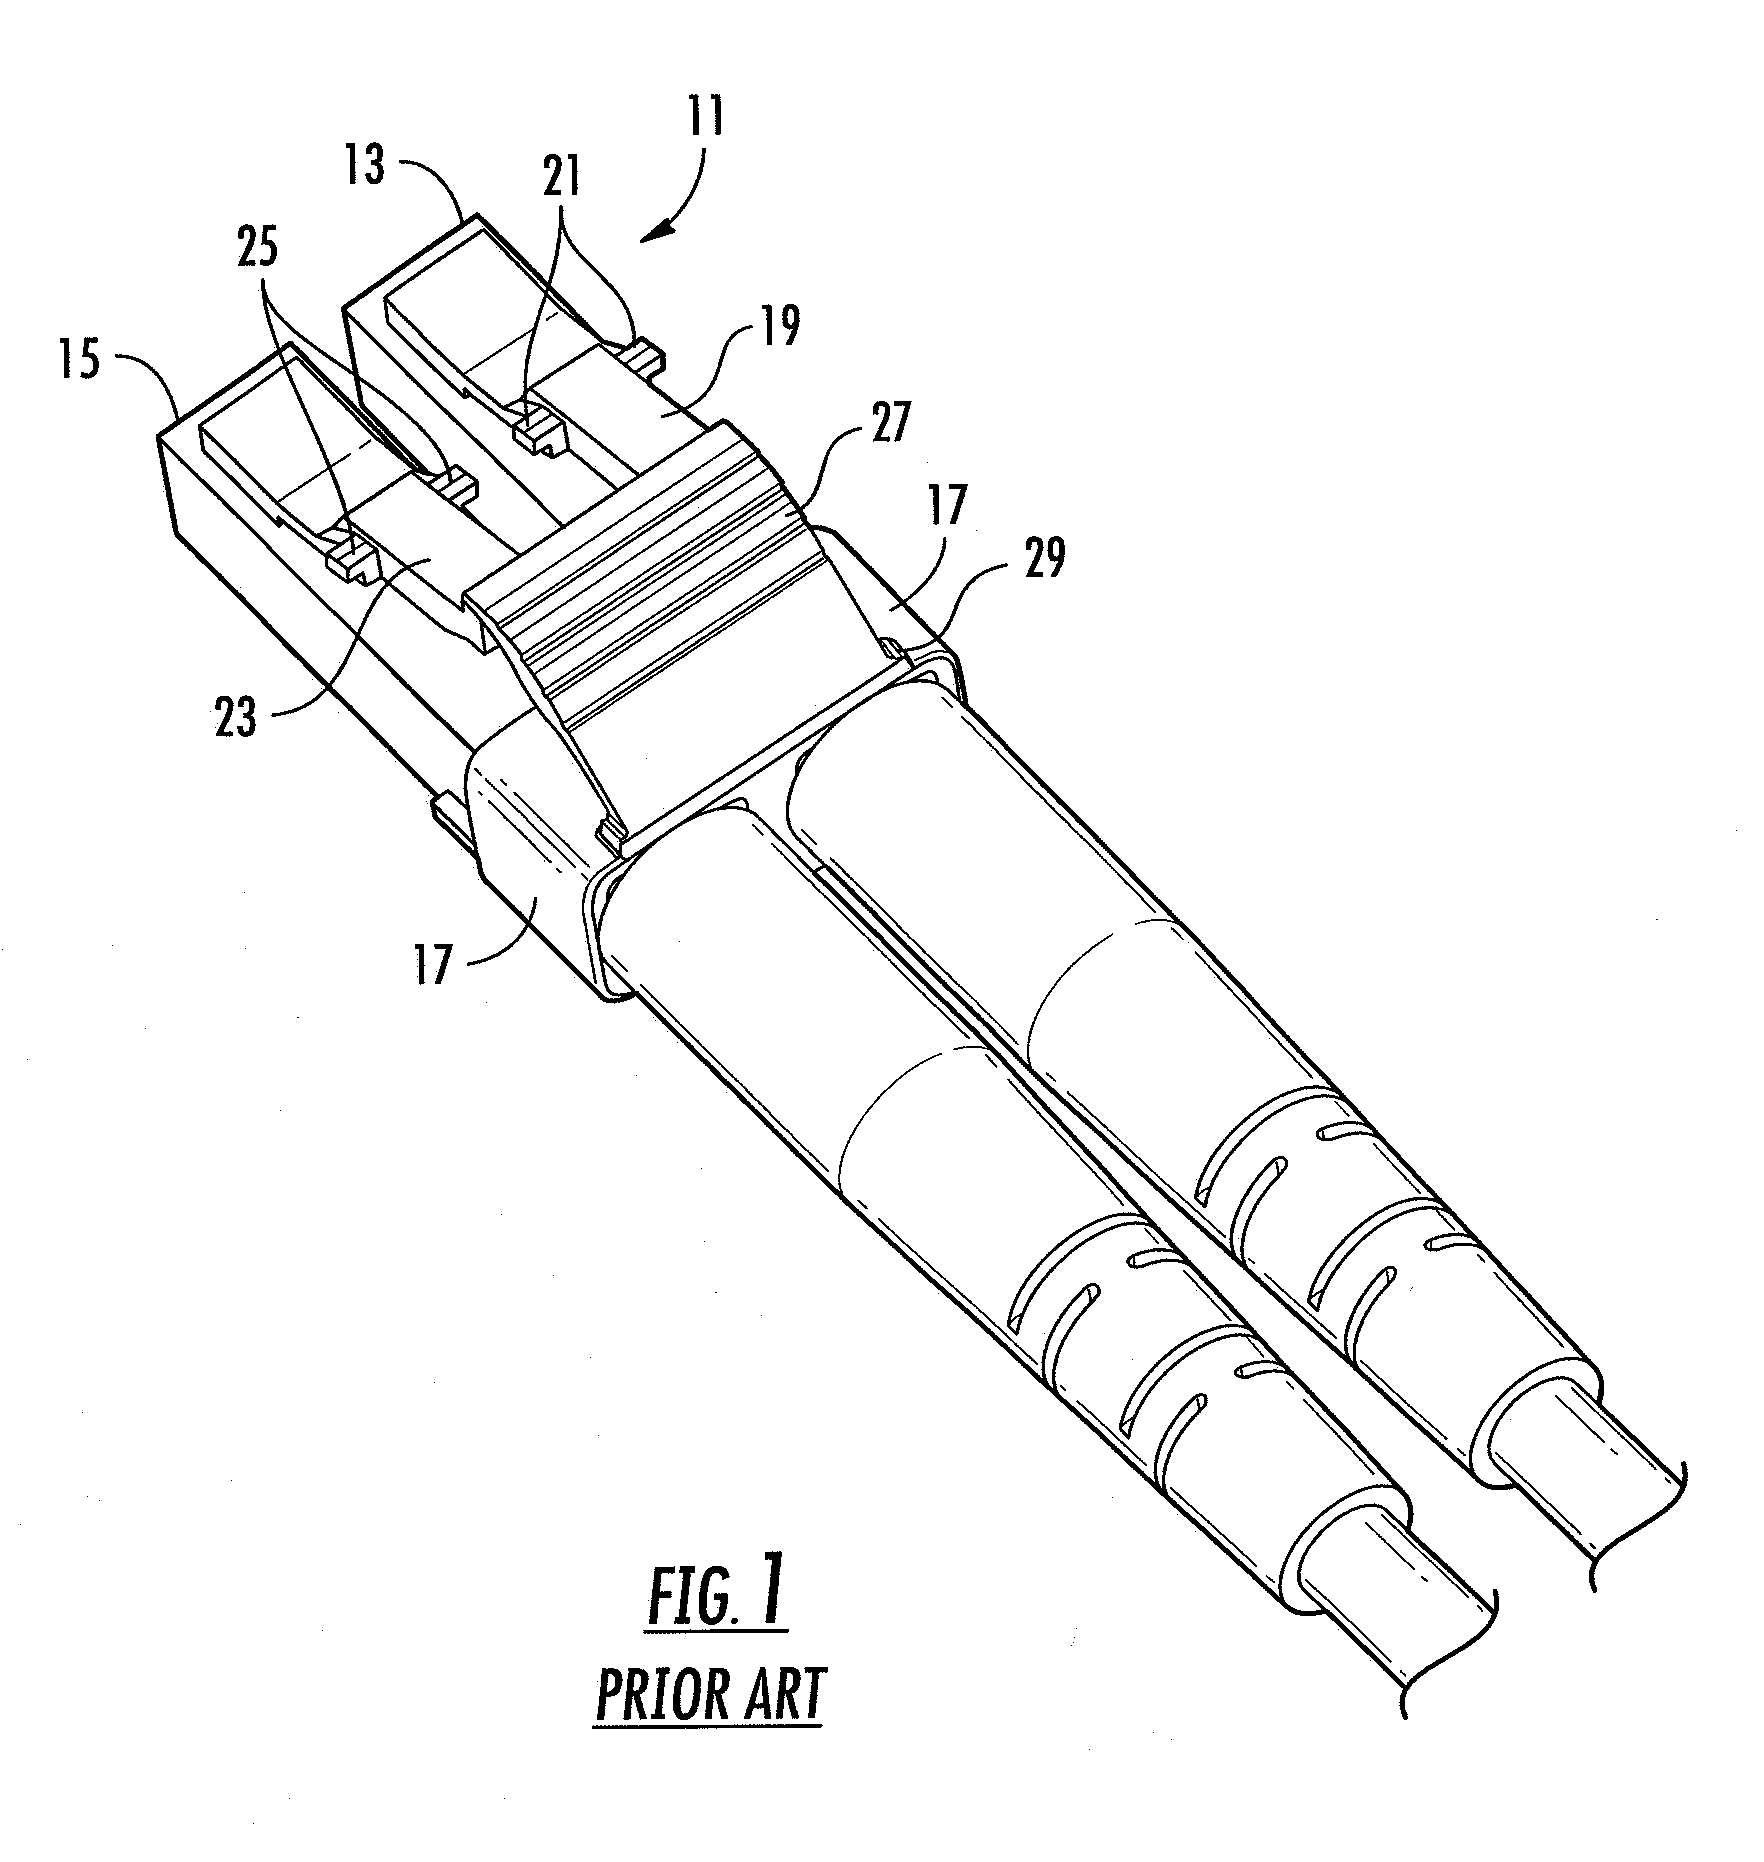 Locking Optical and/or Electrical Connectors and Cable Assemblies